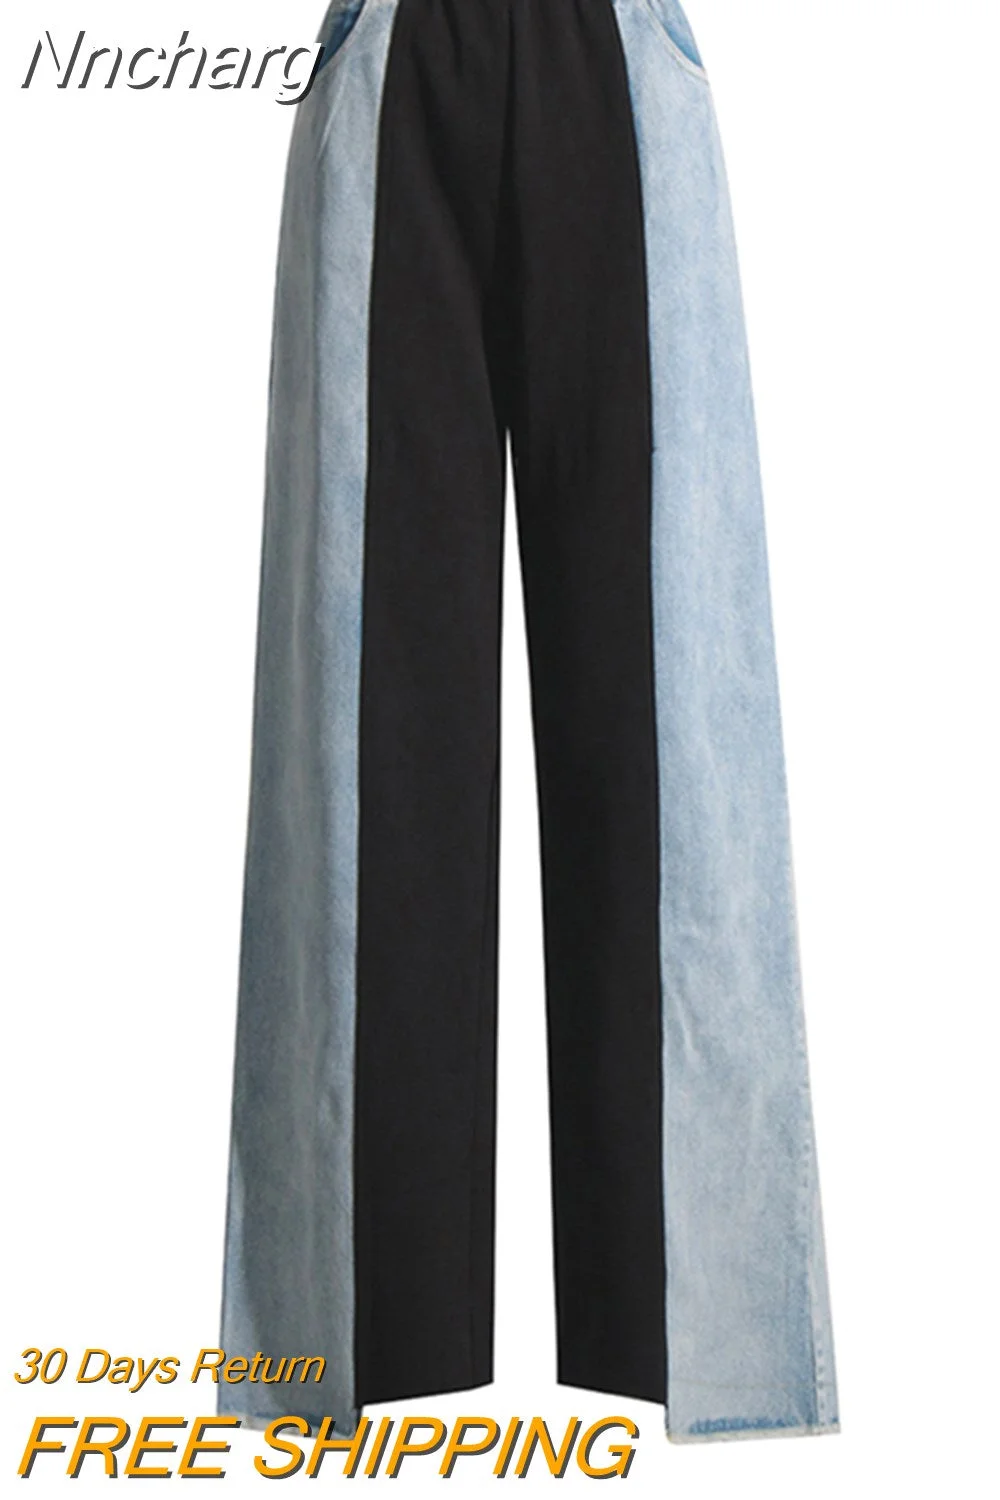 Nncharge Straight Loose Denim Pants Female High Waist Colorblock Loose Wide Leg Long Trousers Women Clothing 2023 Style New